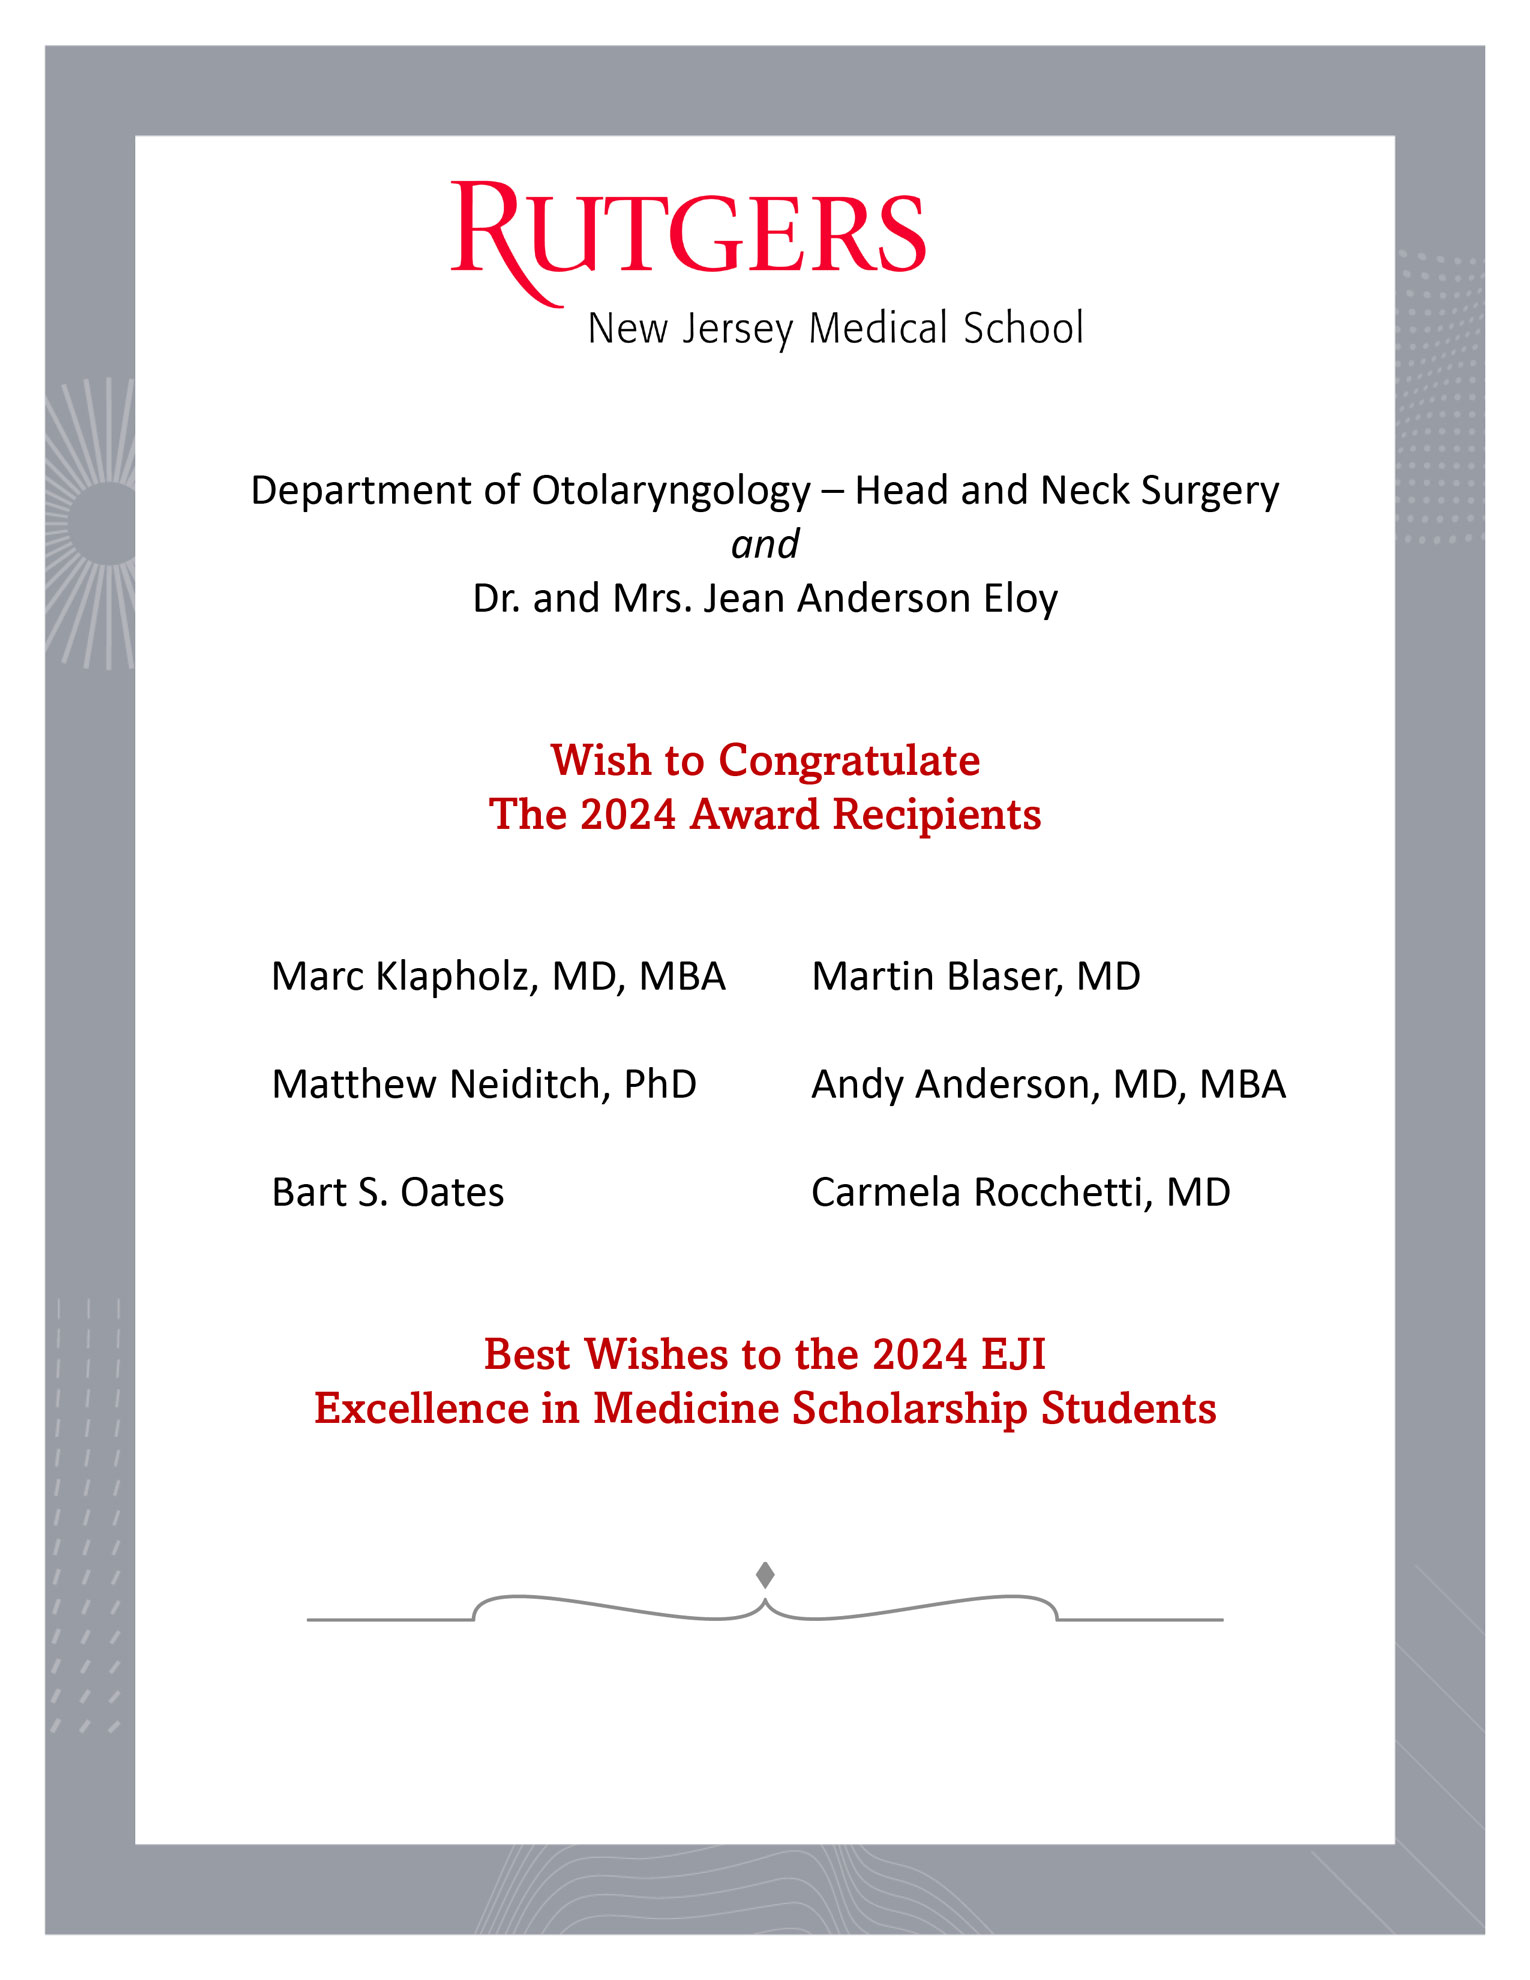 Rutgers NJMS Department of Otolaryngology and Dr. and Mrs. Jean Anderson Eloy advertisement